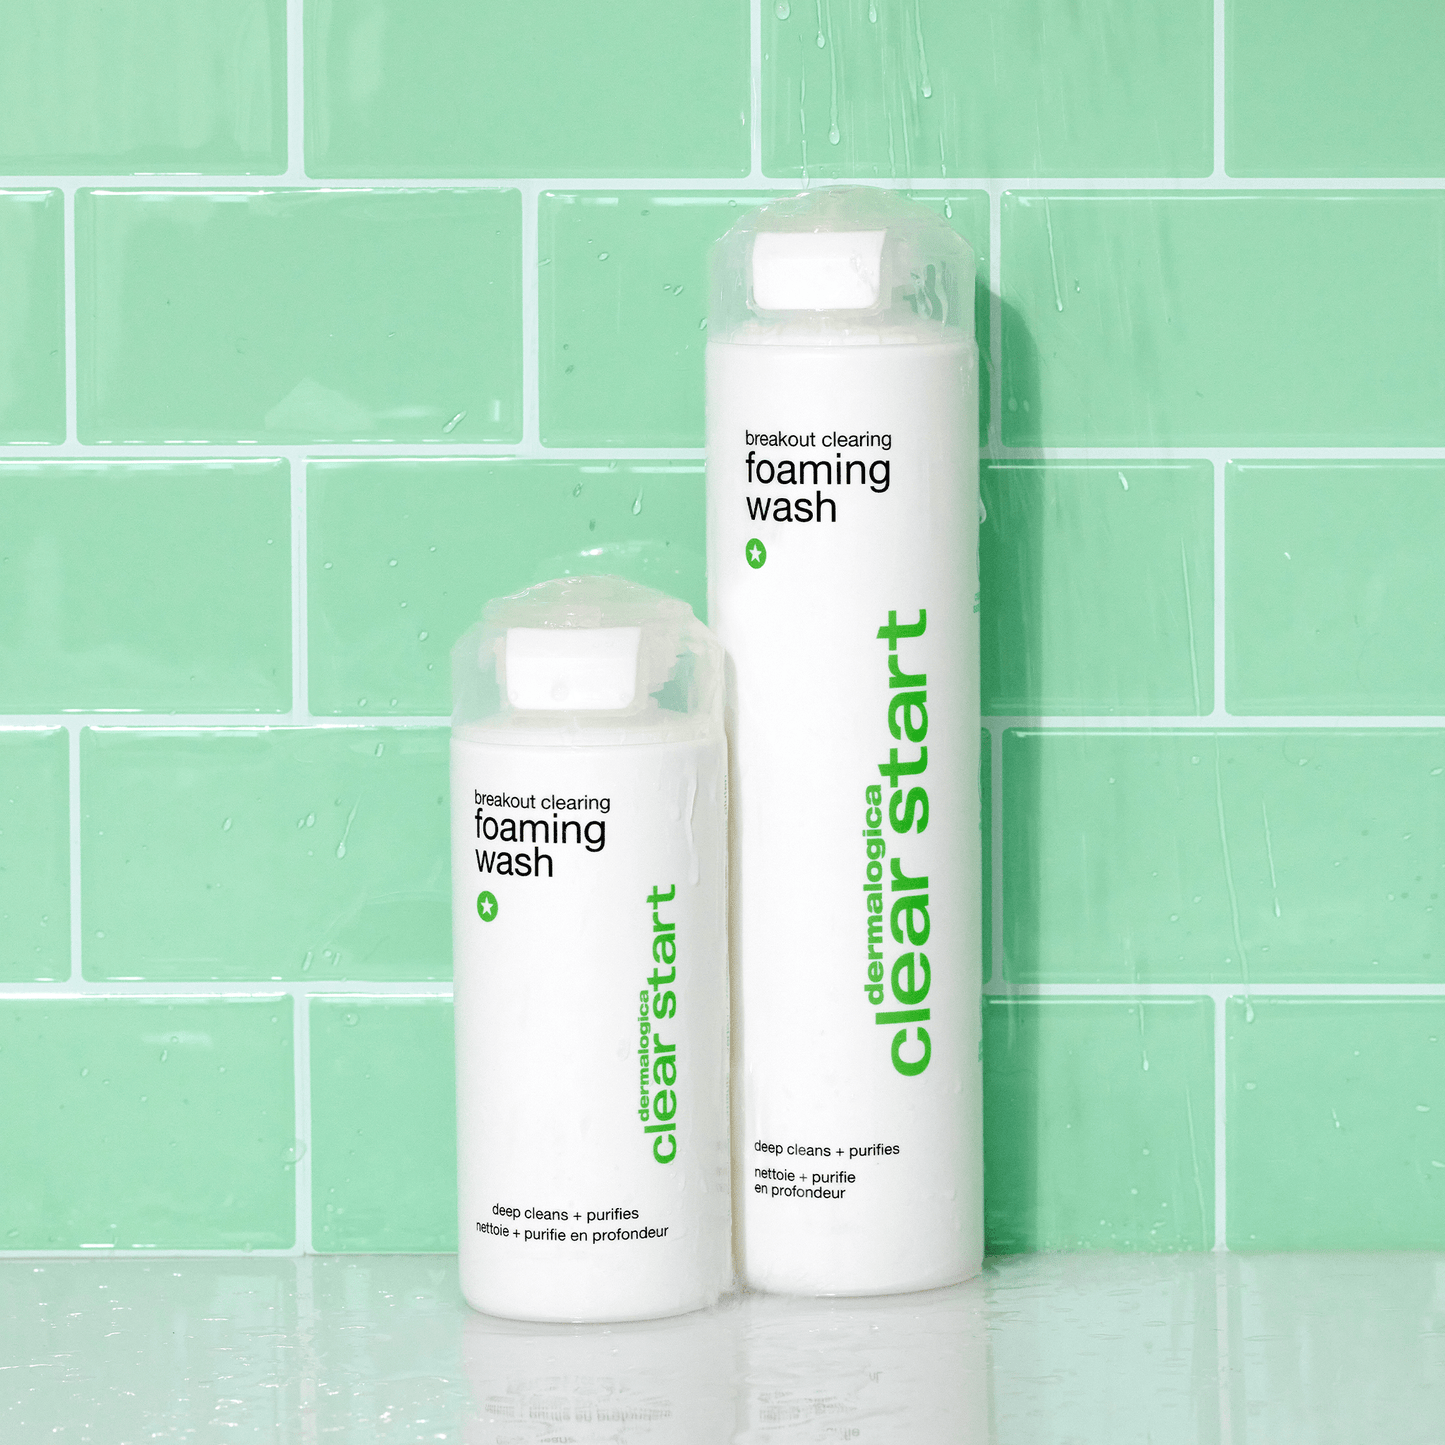 Breakout Clearing Foaming Wash 6 oz and 10 oz in shower